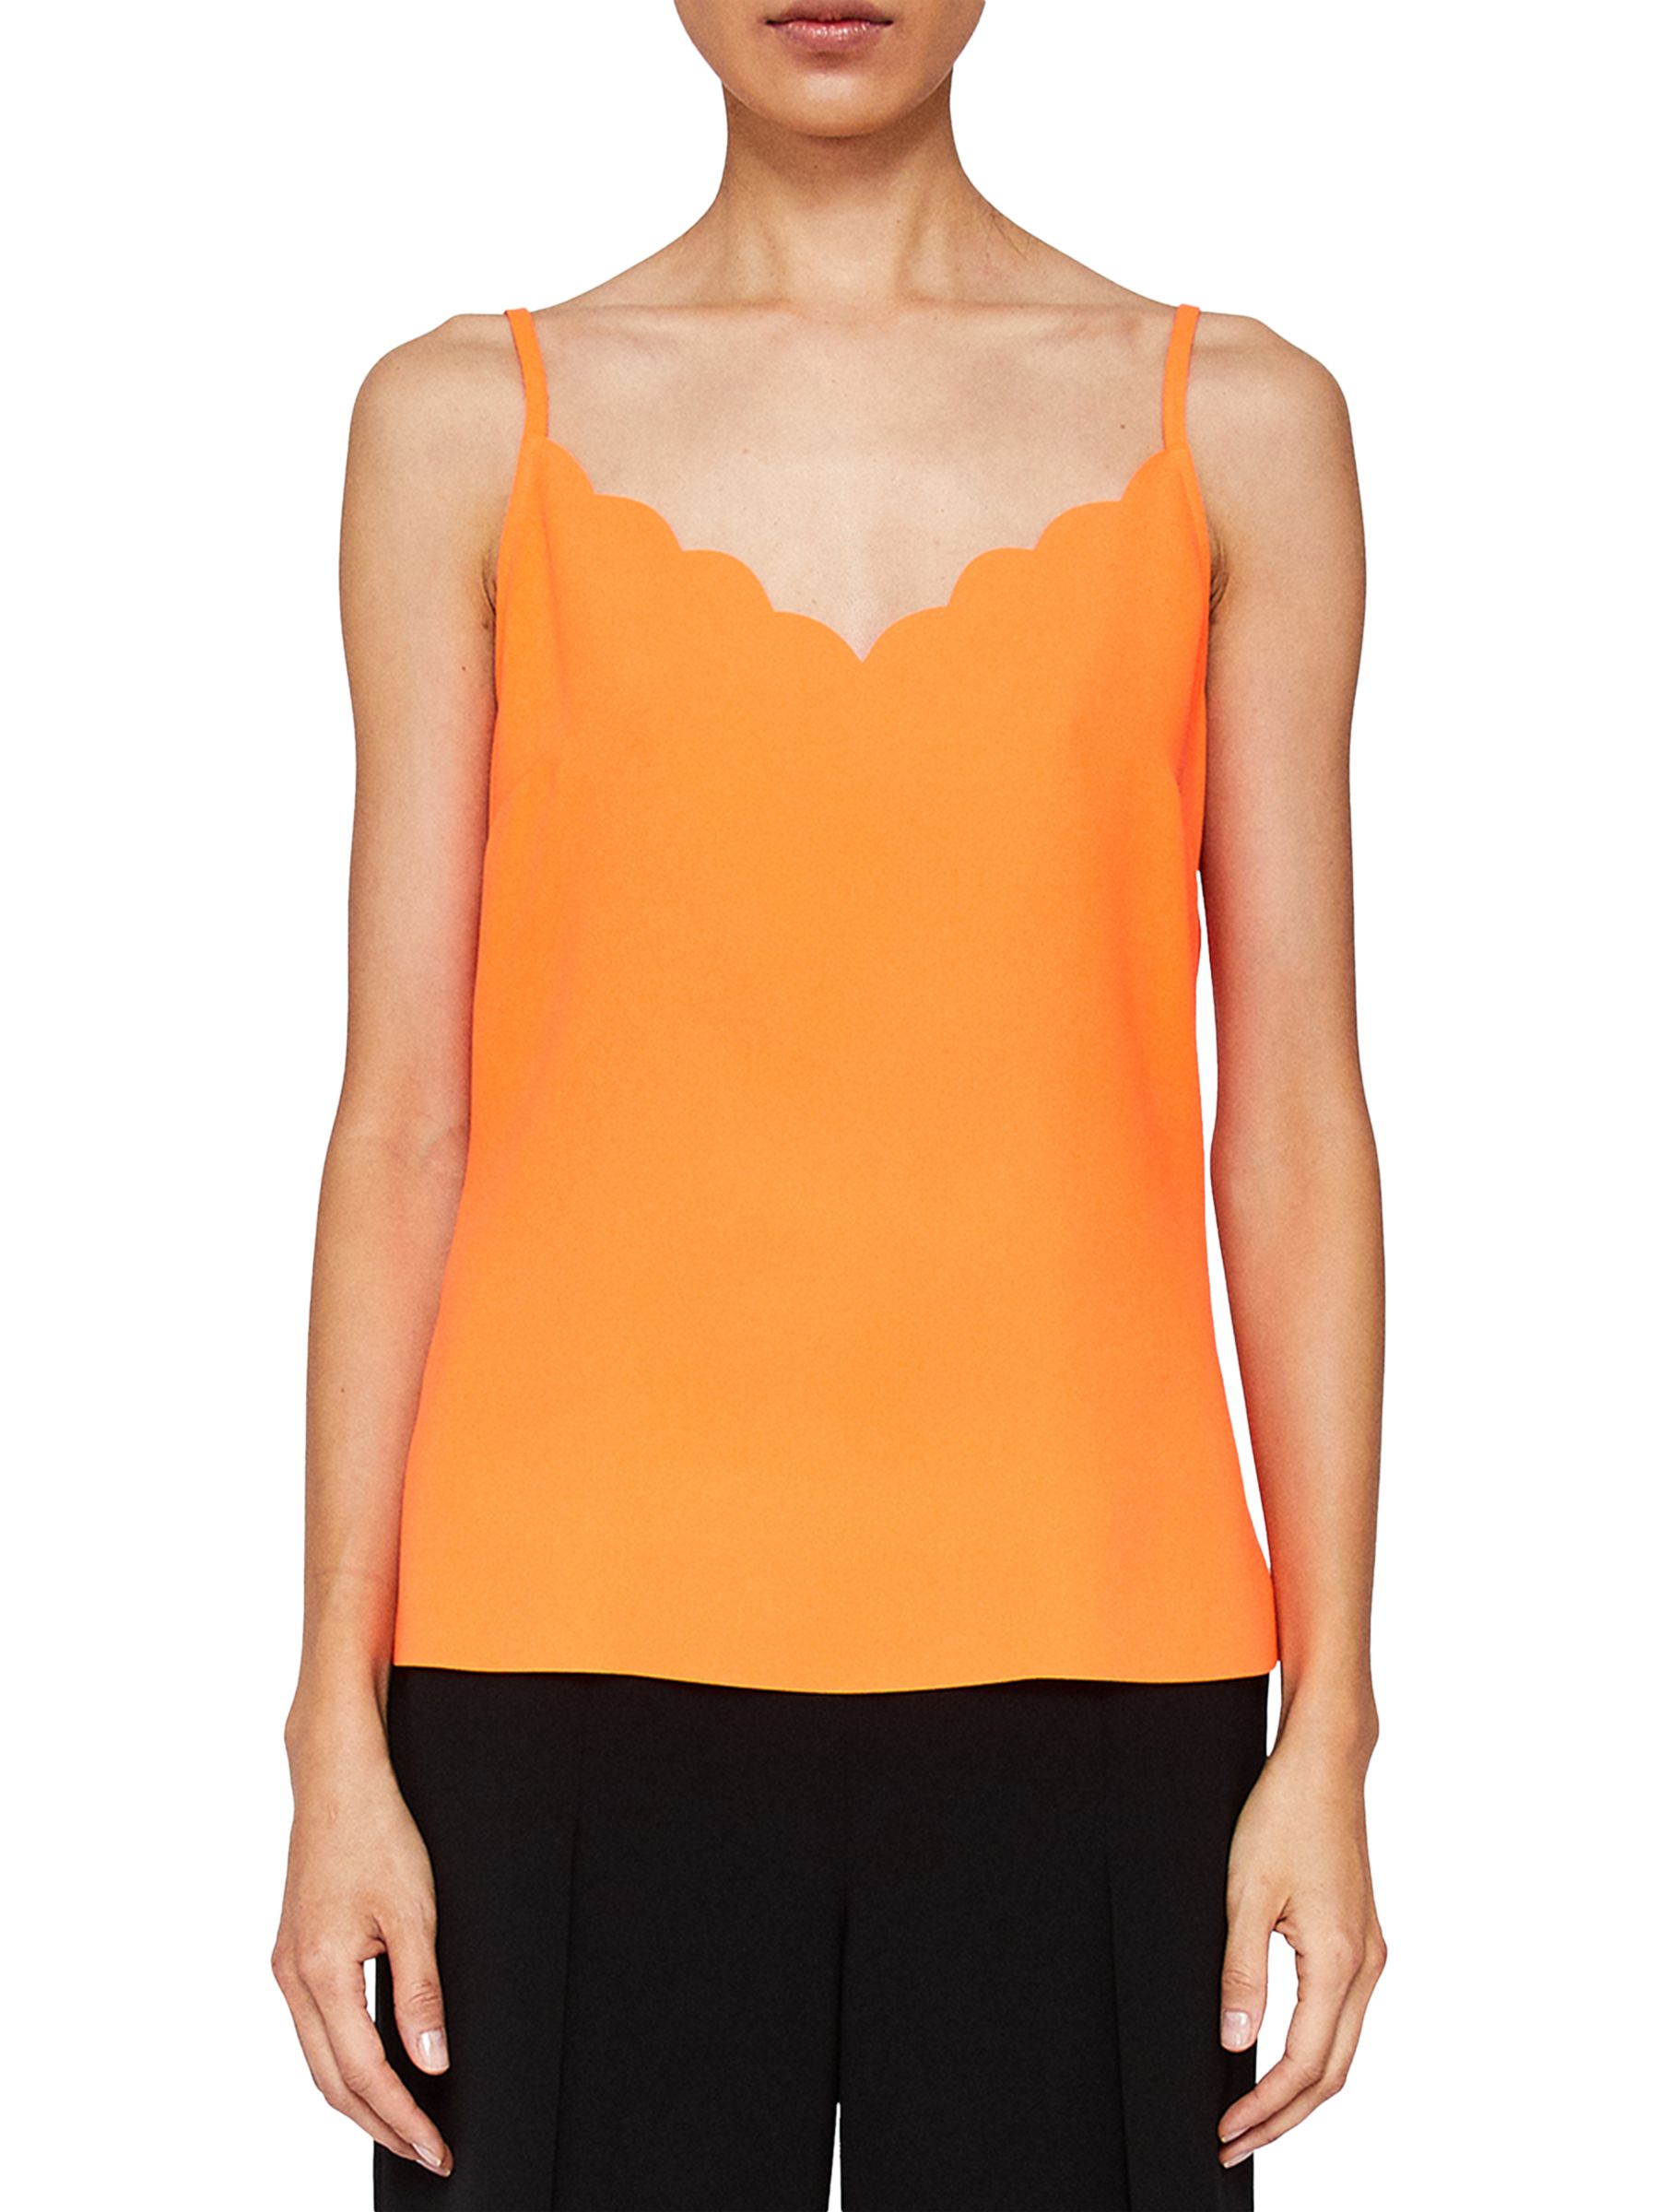 Ted Baker Siina Scallop Neckline Camisole Top at John Lewis & Partners